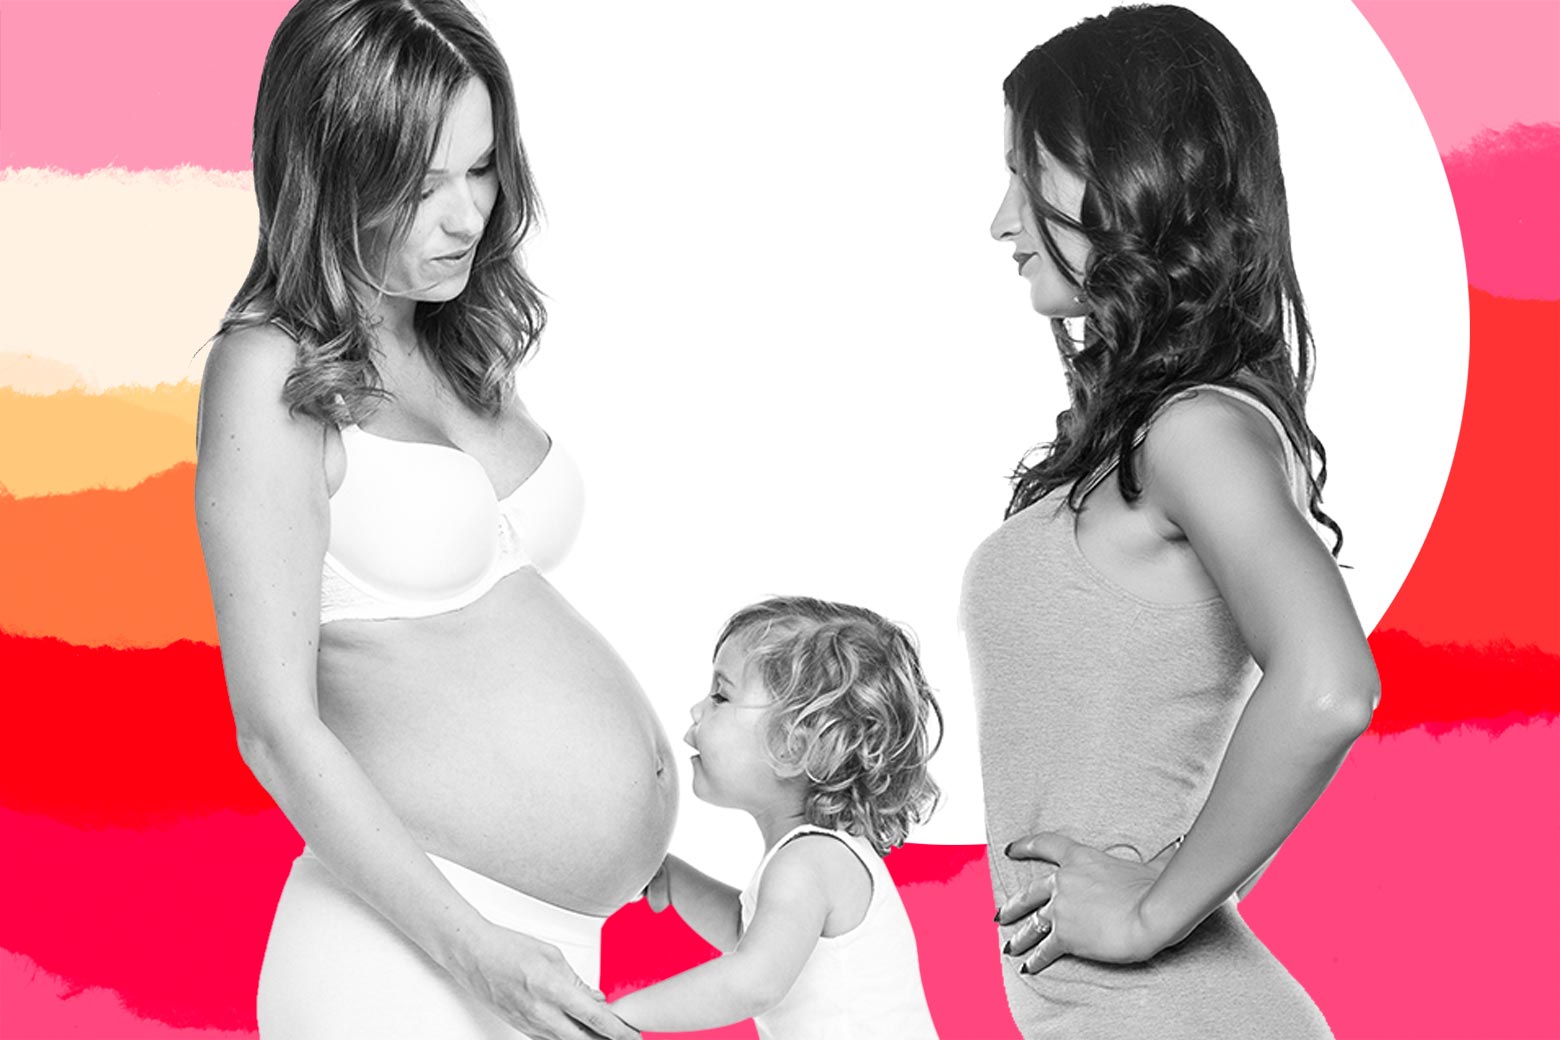 A pregnant woman with a toddler and another woman stand together.